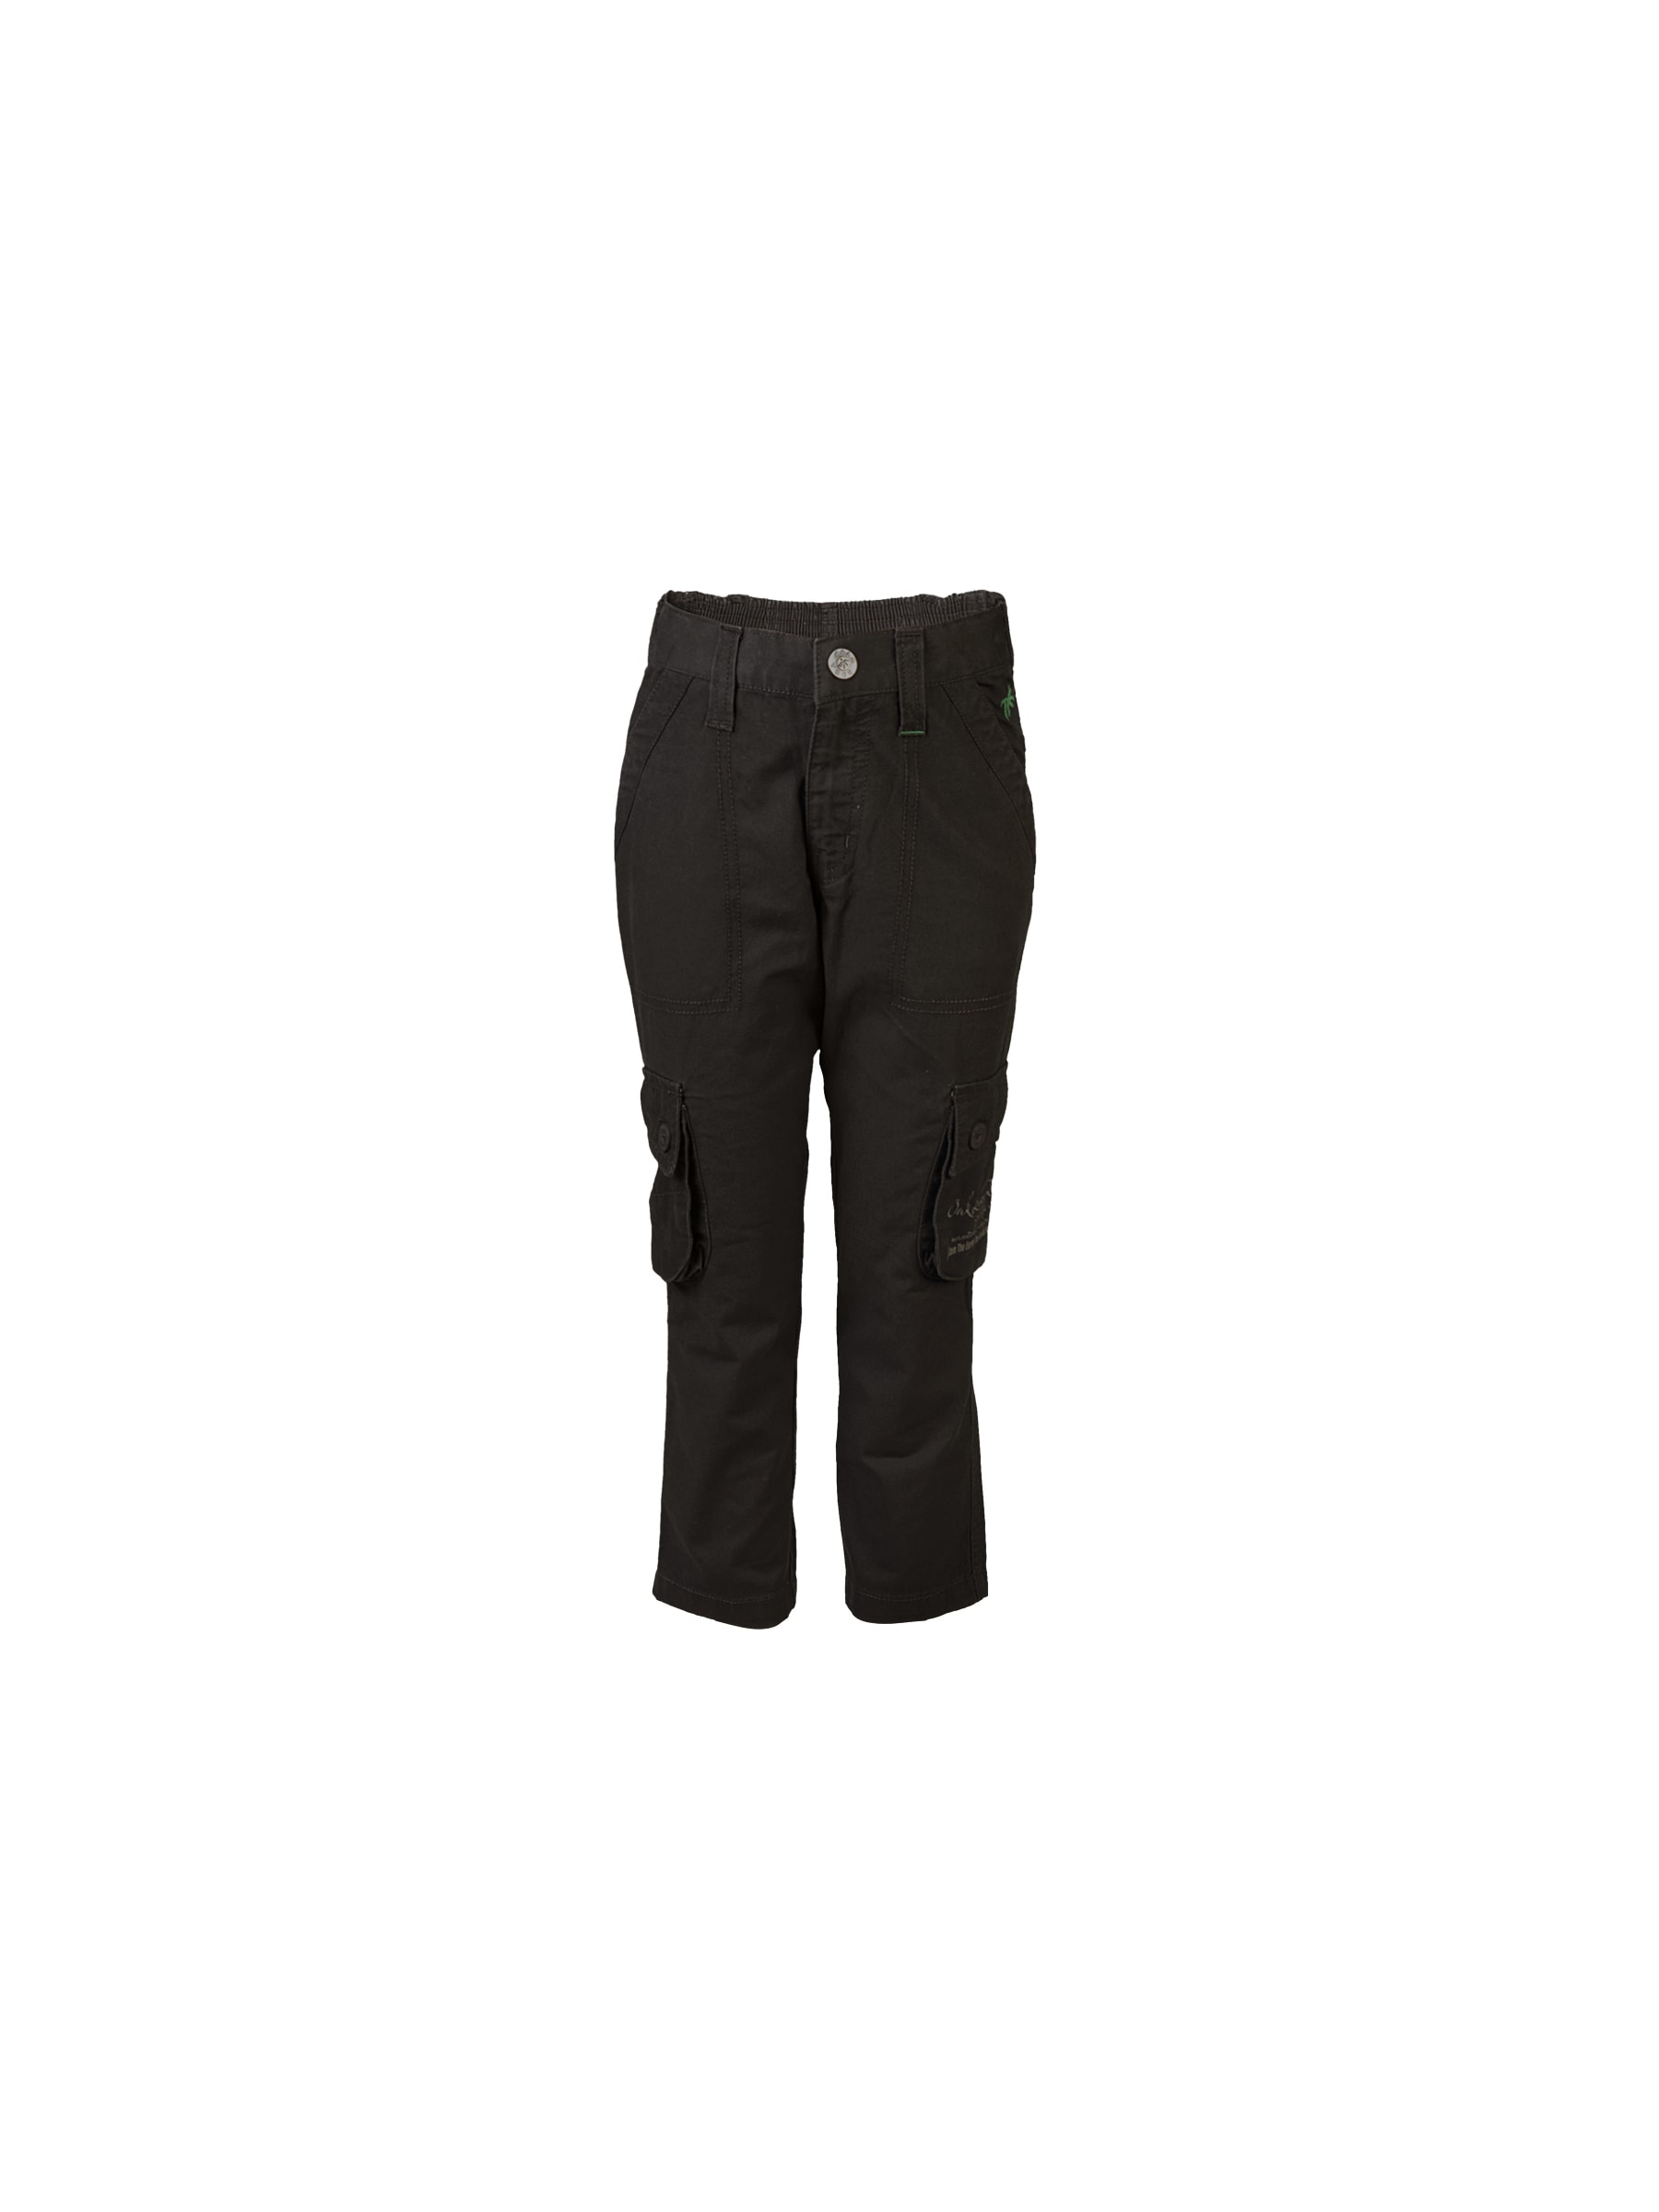 Palm Tree Kids Boy Solid Brown Trousers